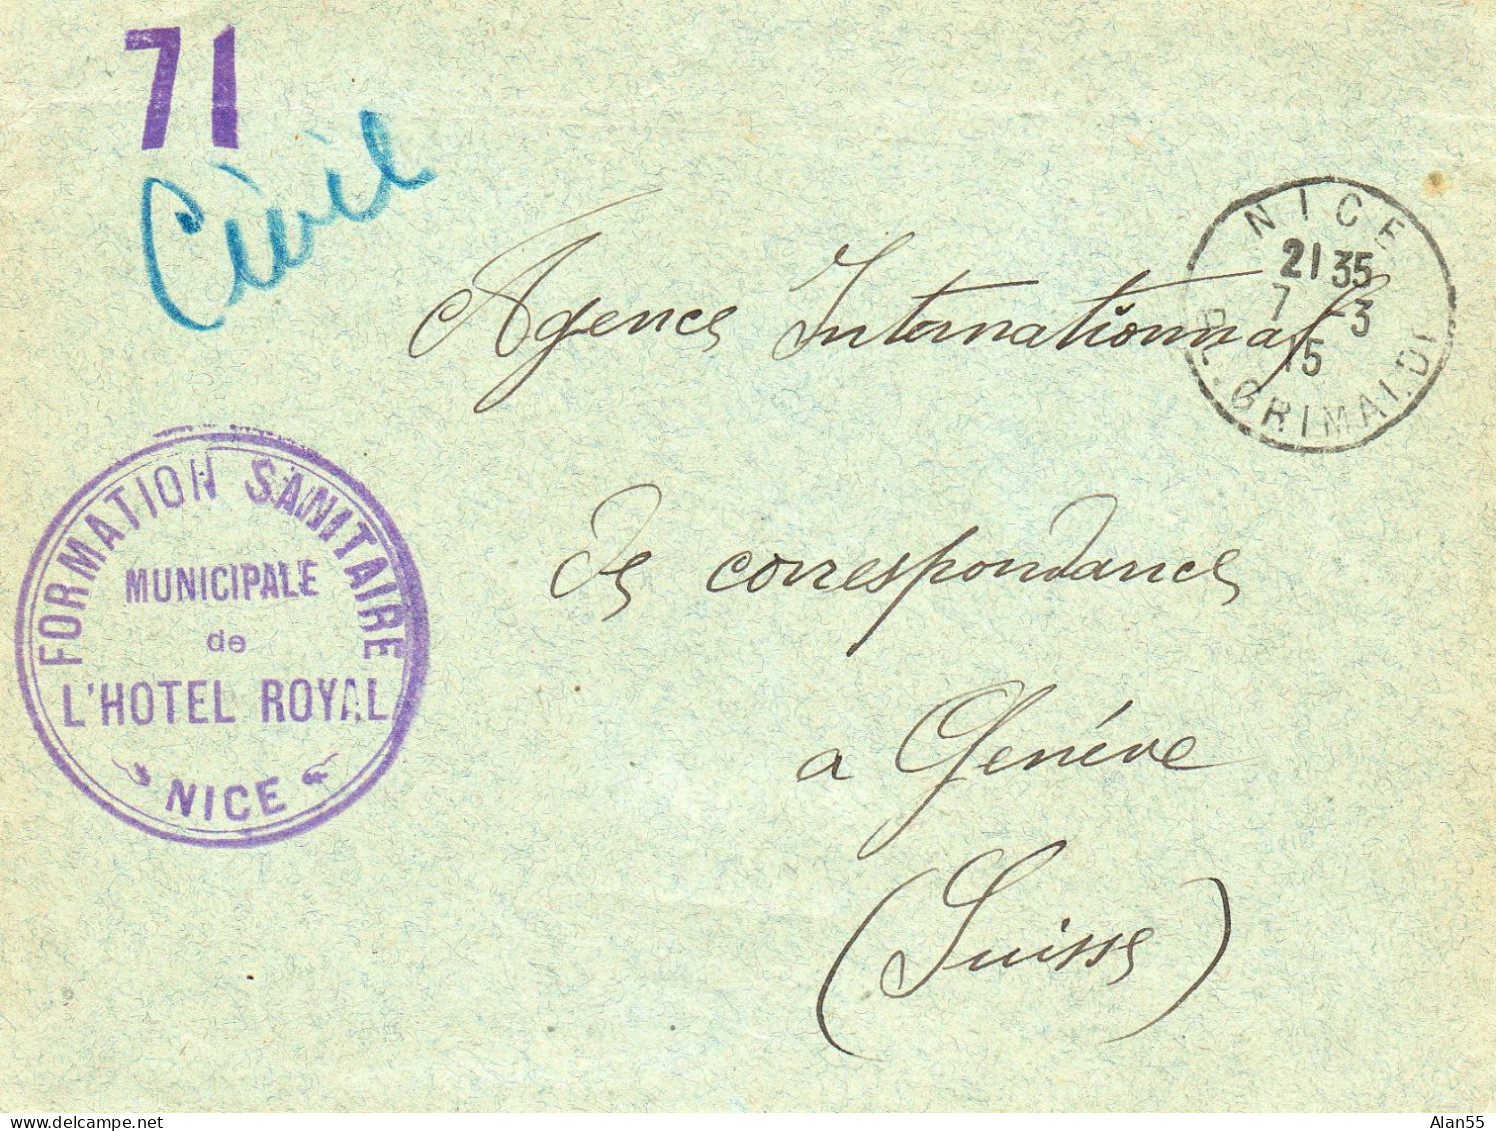 1915.F.M.APG GENEVE (SUISSE)."FORMATION SANITAIRE MUNICIPALE HOTEL ROYAL". NICE (ALPES MARITIMES). - WW1